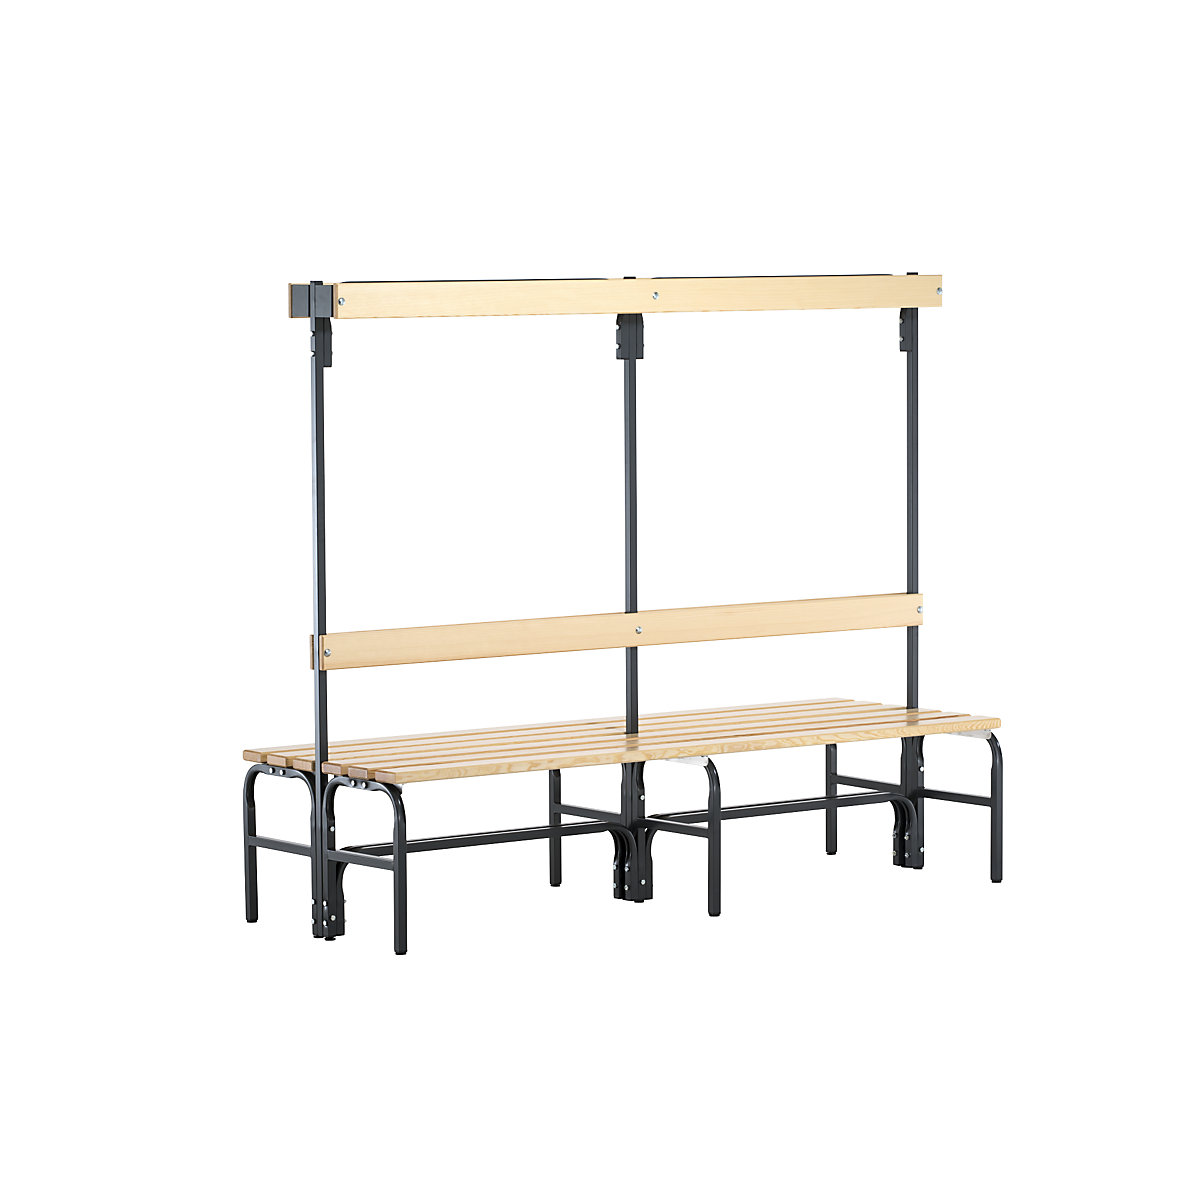 Sypro – Cloakroom bench with hook strips